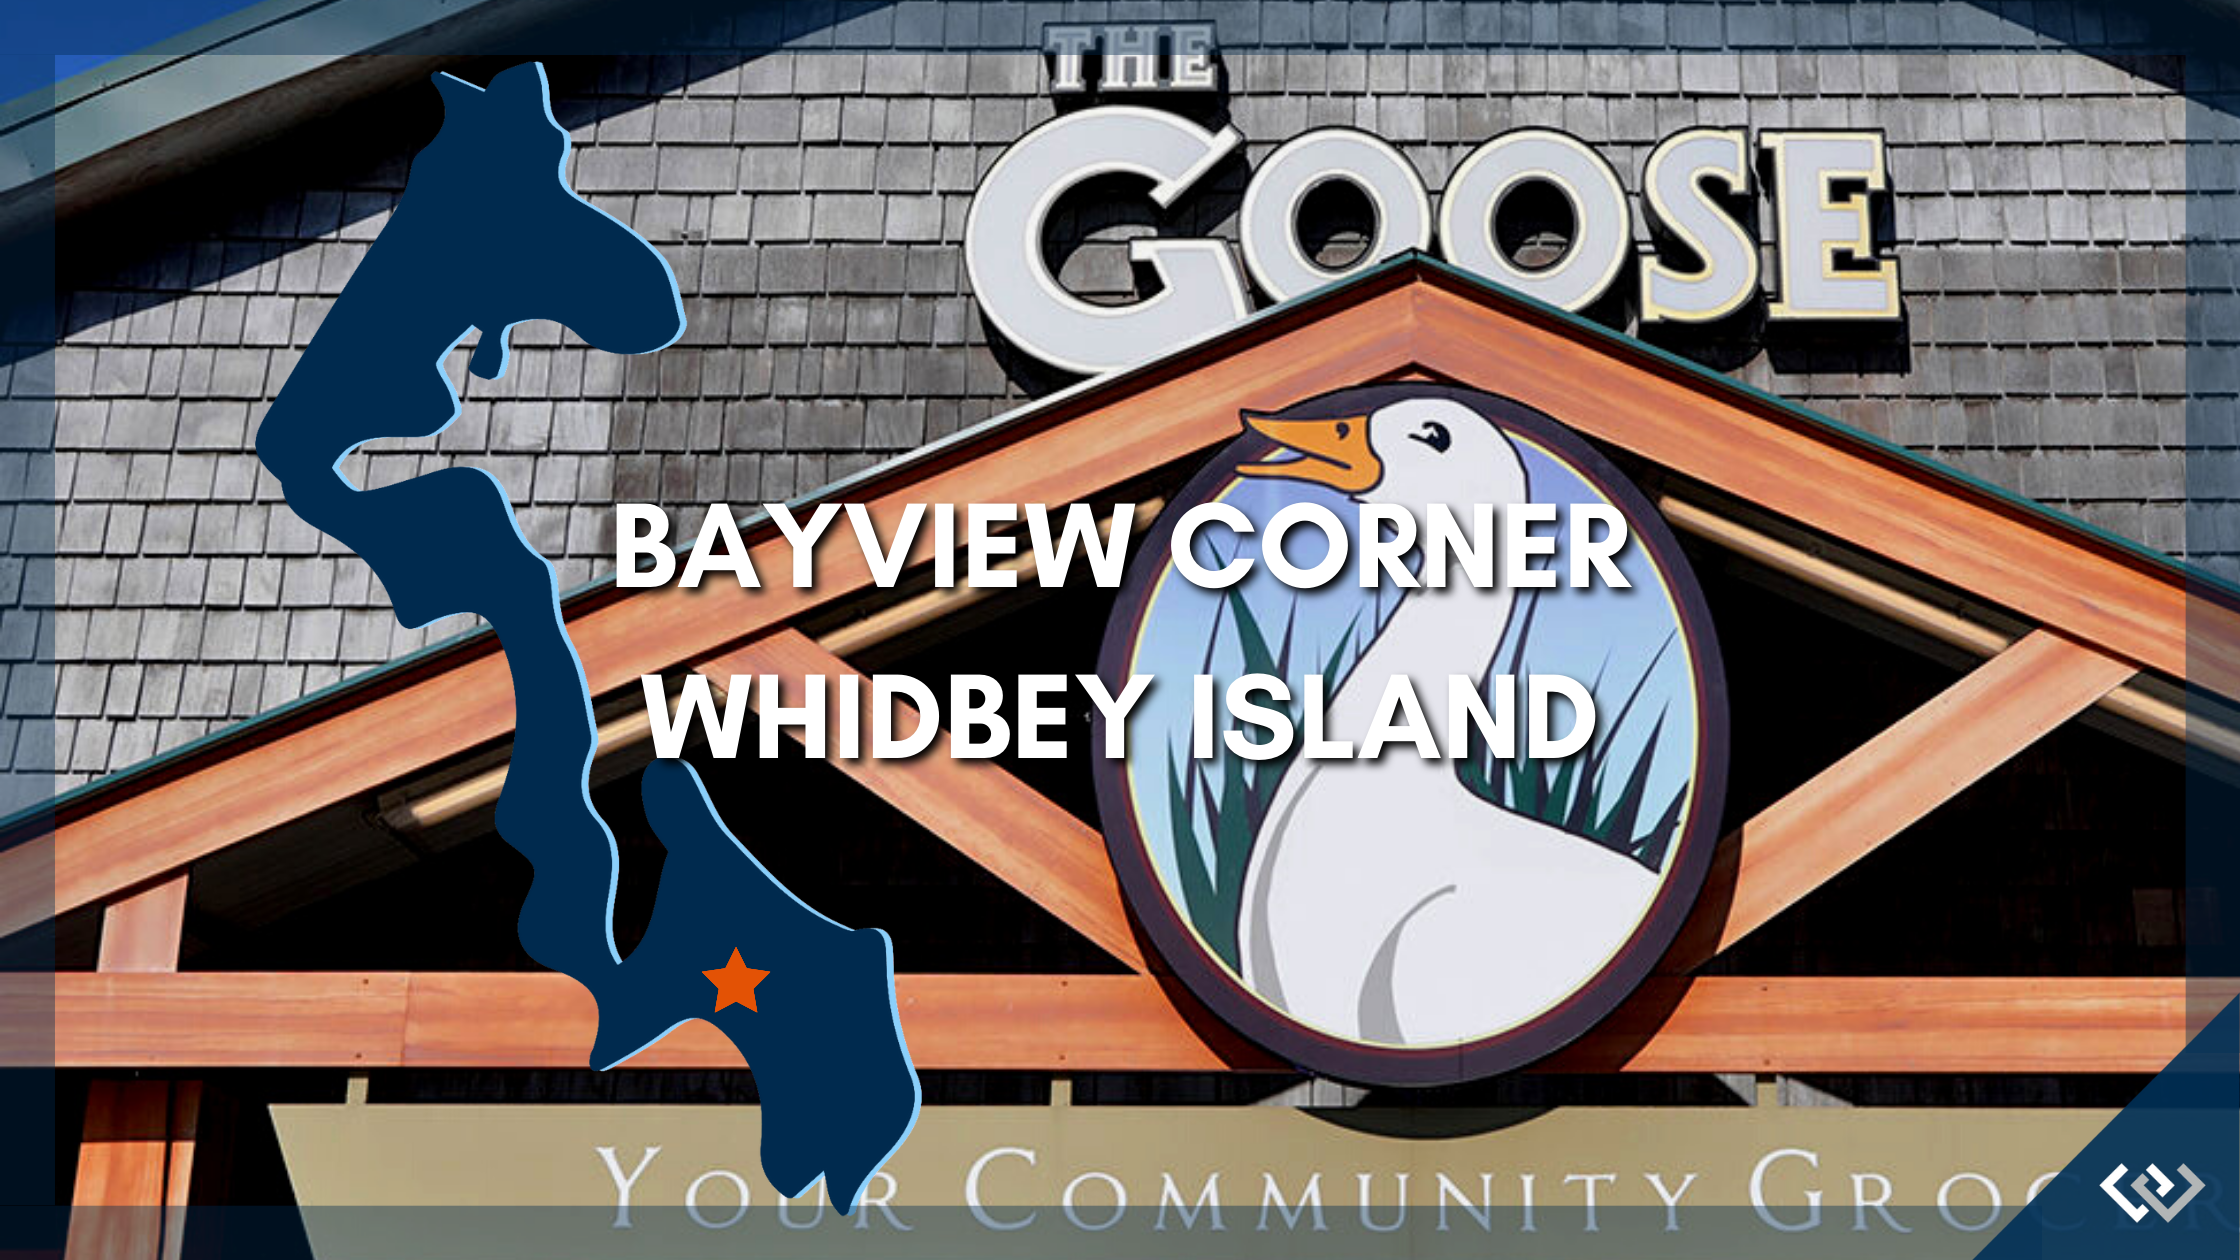 Bayview Corner Whidbey Island Guide Featured Image